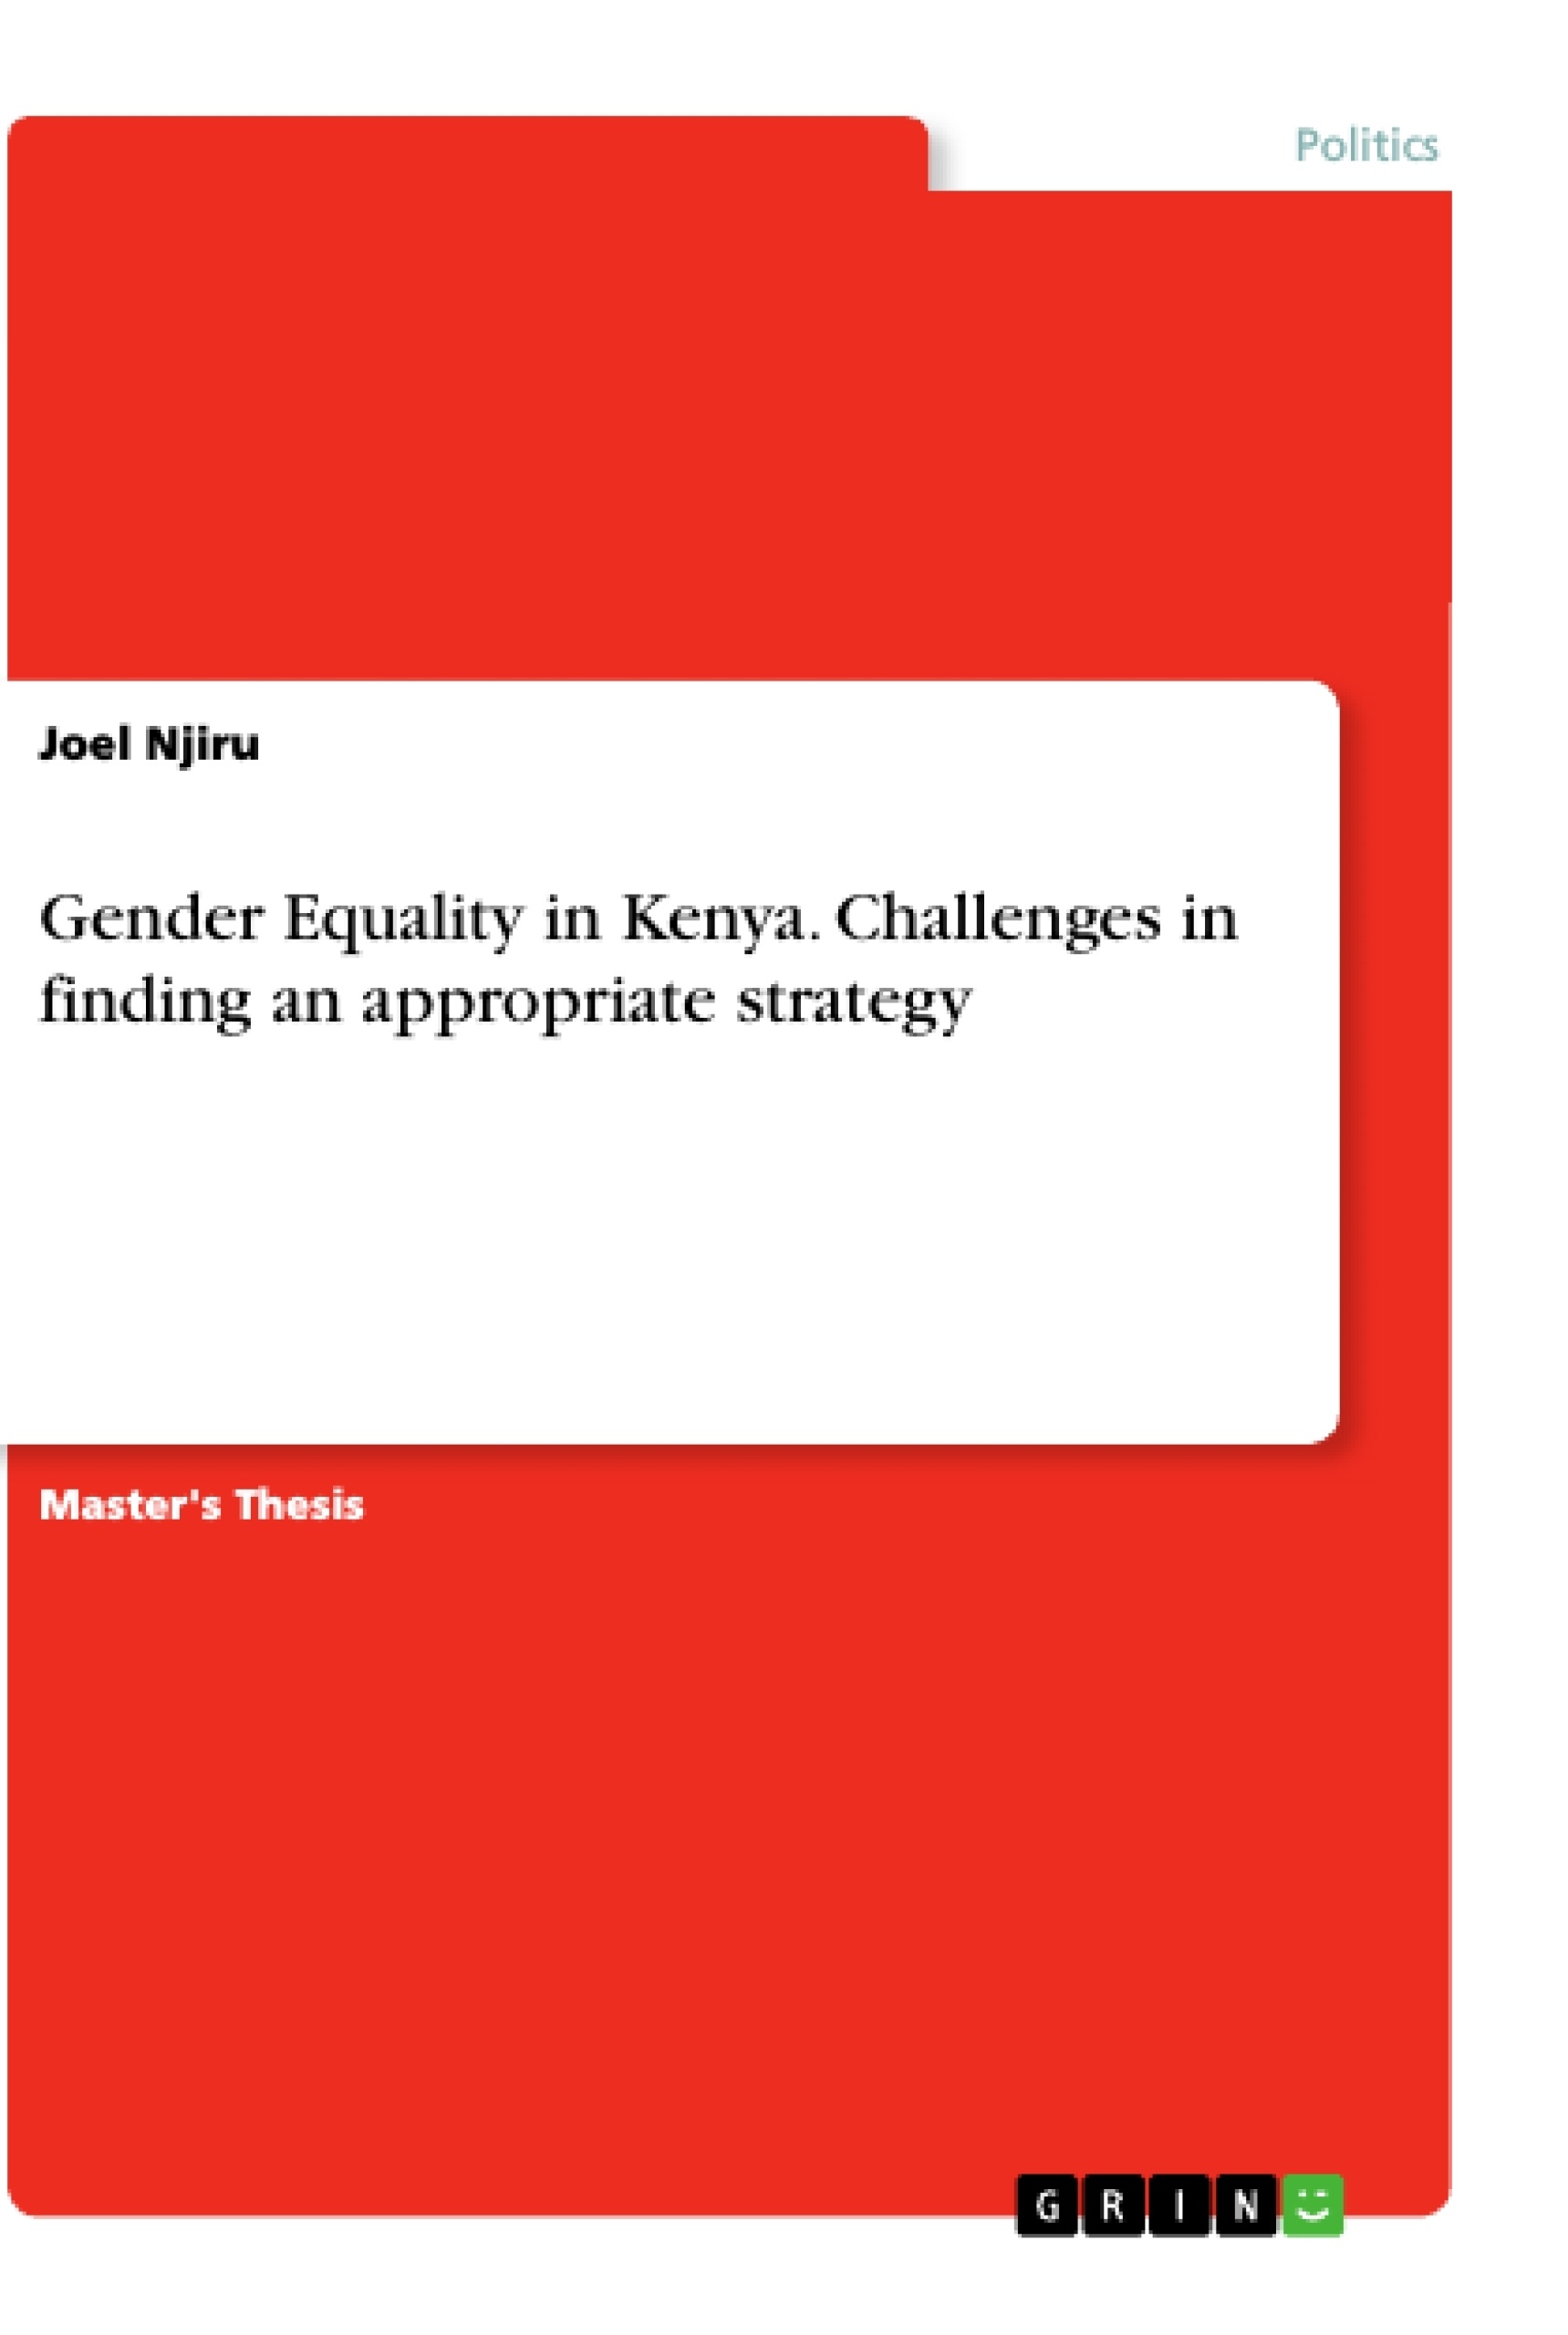 Titre: Gender Equality in Kenya. Challenges in finding an appropriate strategy